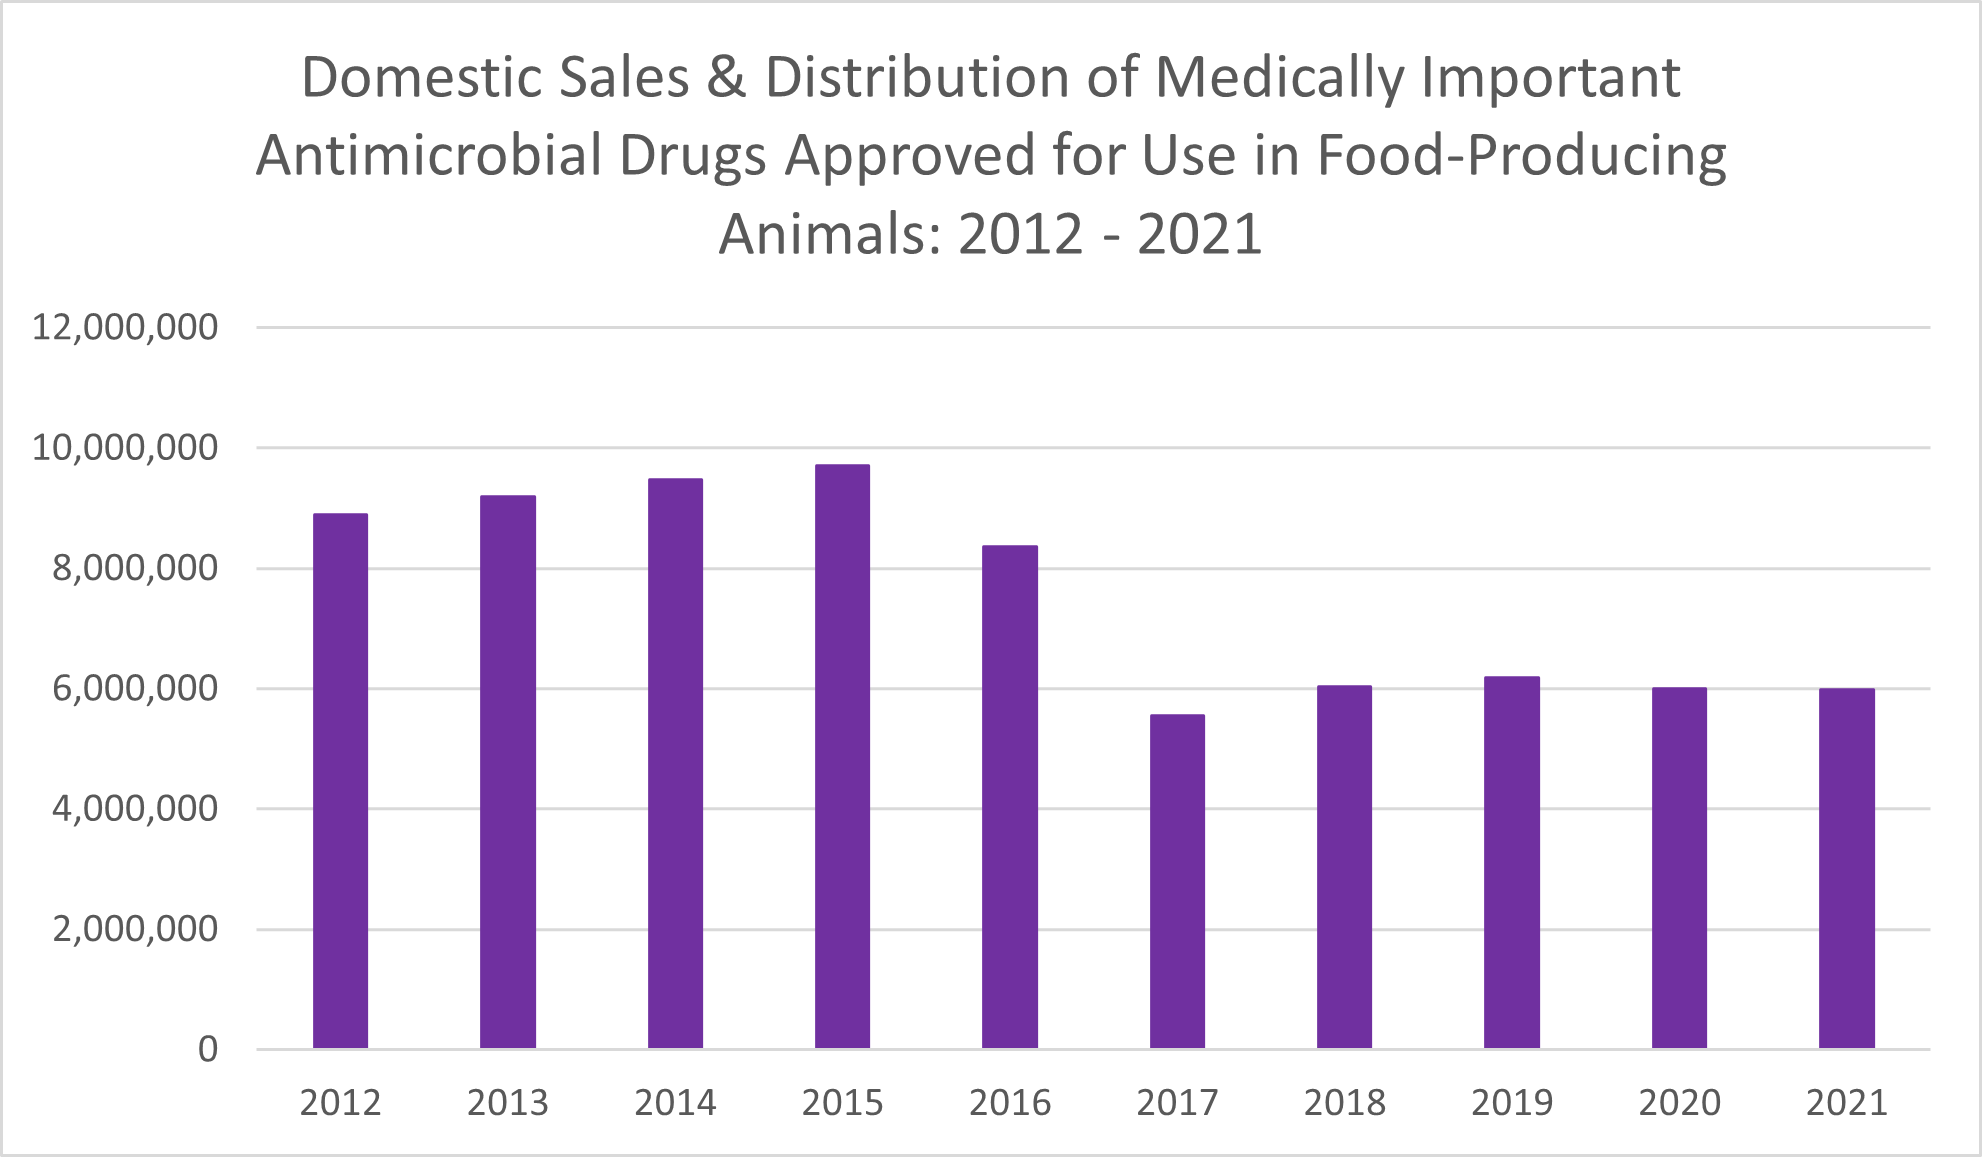 This bar graph provides the total annual domestic sales and distribution data of medically important antimicrobial drugs approved for use in food-producing animals between 2012 and 2021. Annual totals (kg) of active ingredient are as follows: 2012: 8897420; 2013: 9193293; 2014: 9479339; 2015: 9702943; 2016: 8356340; 2017: 5559212; 2018: 6032298; 2019: 6189260; 2020: 6002056; 2021: 5989721.